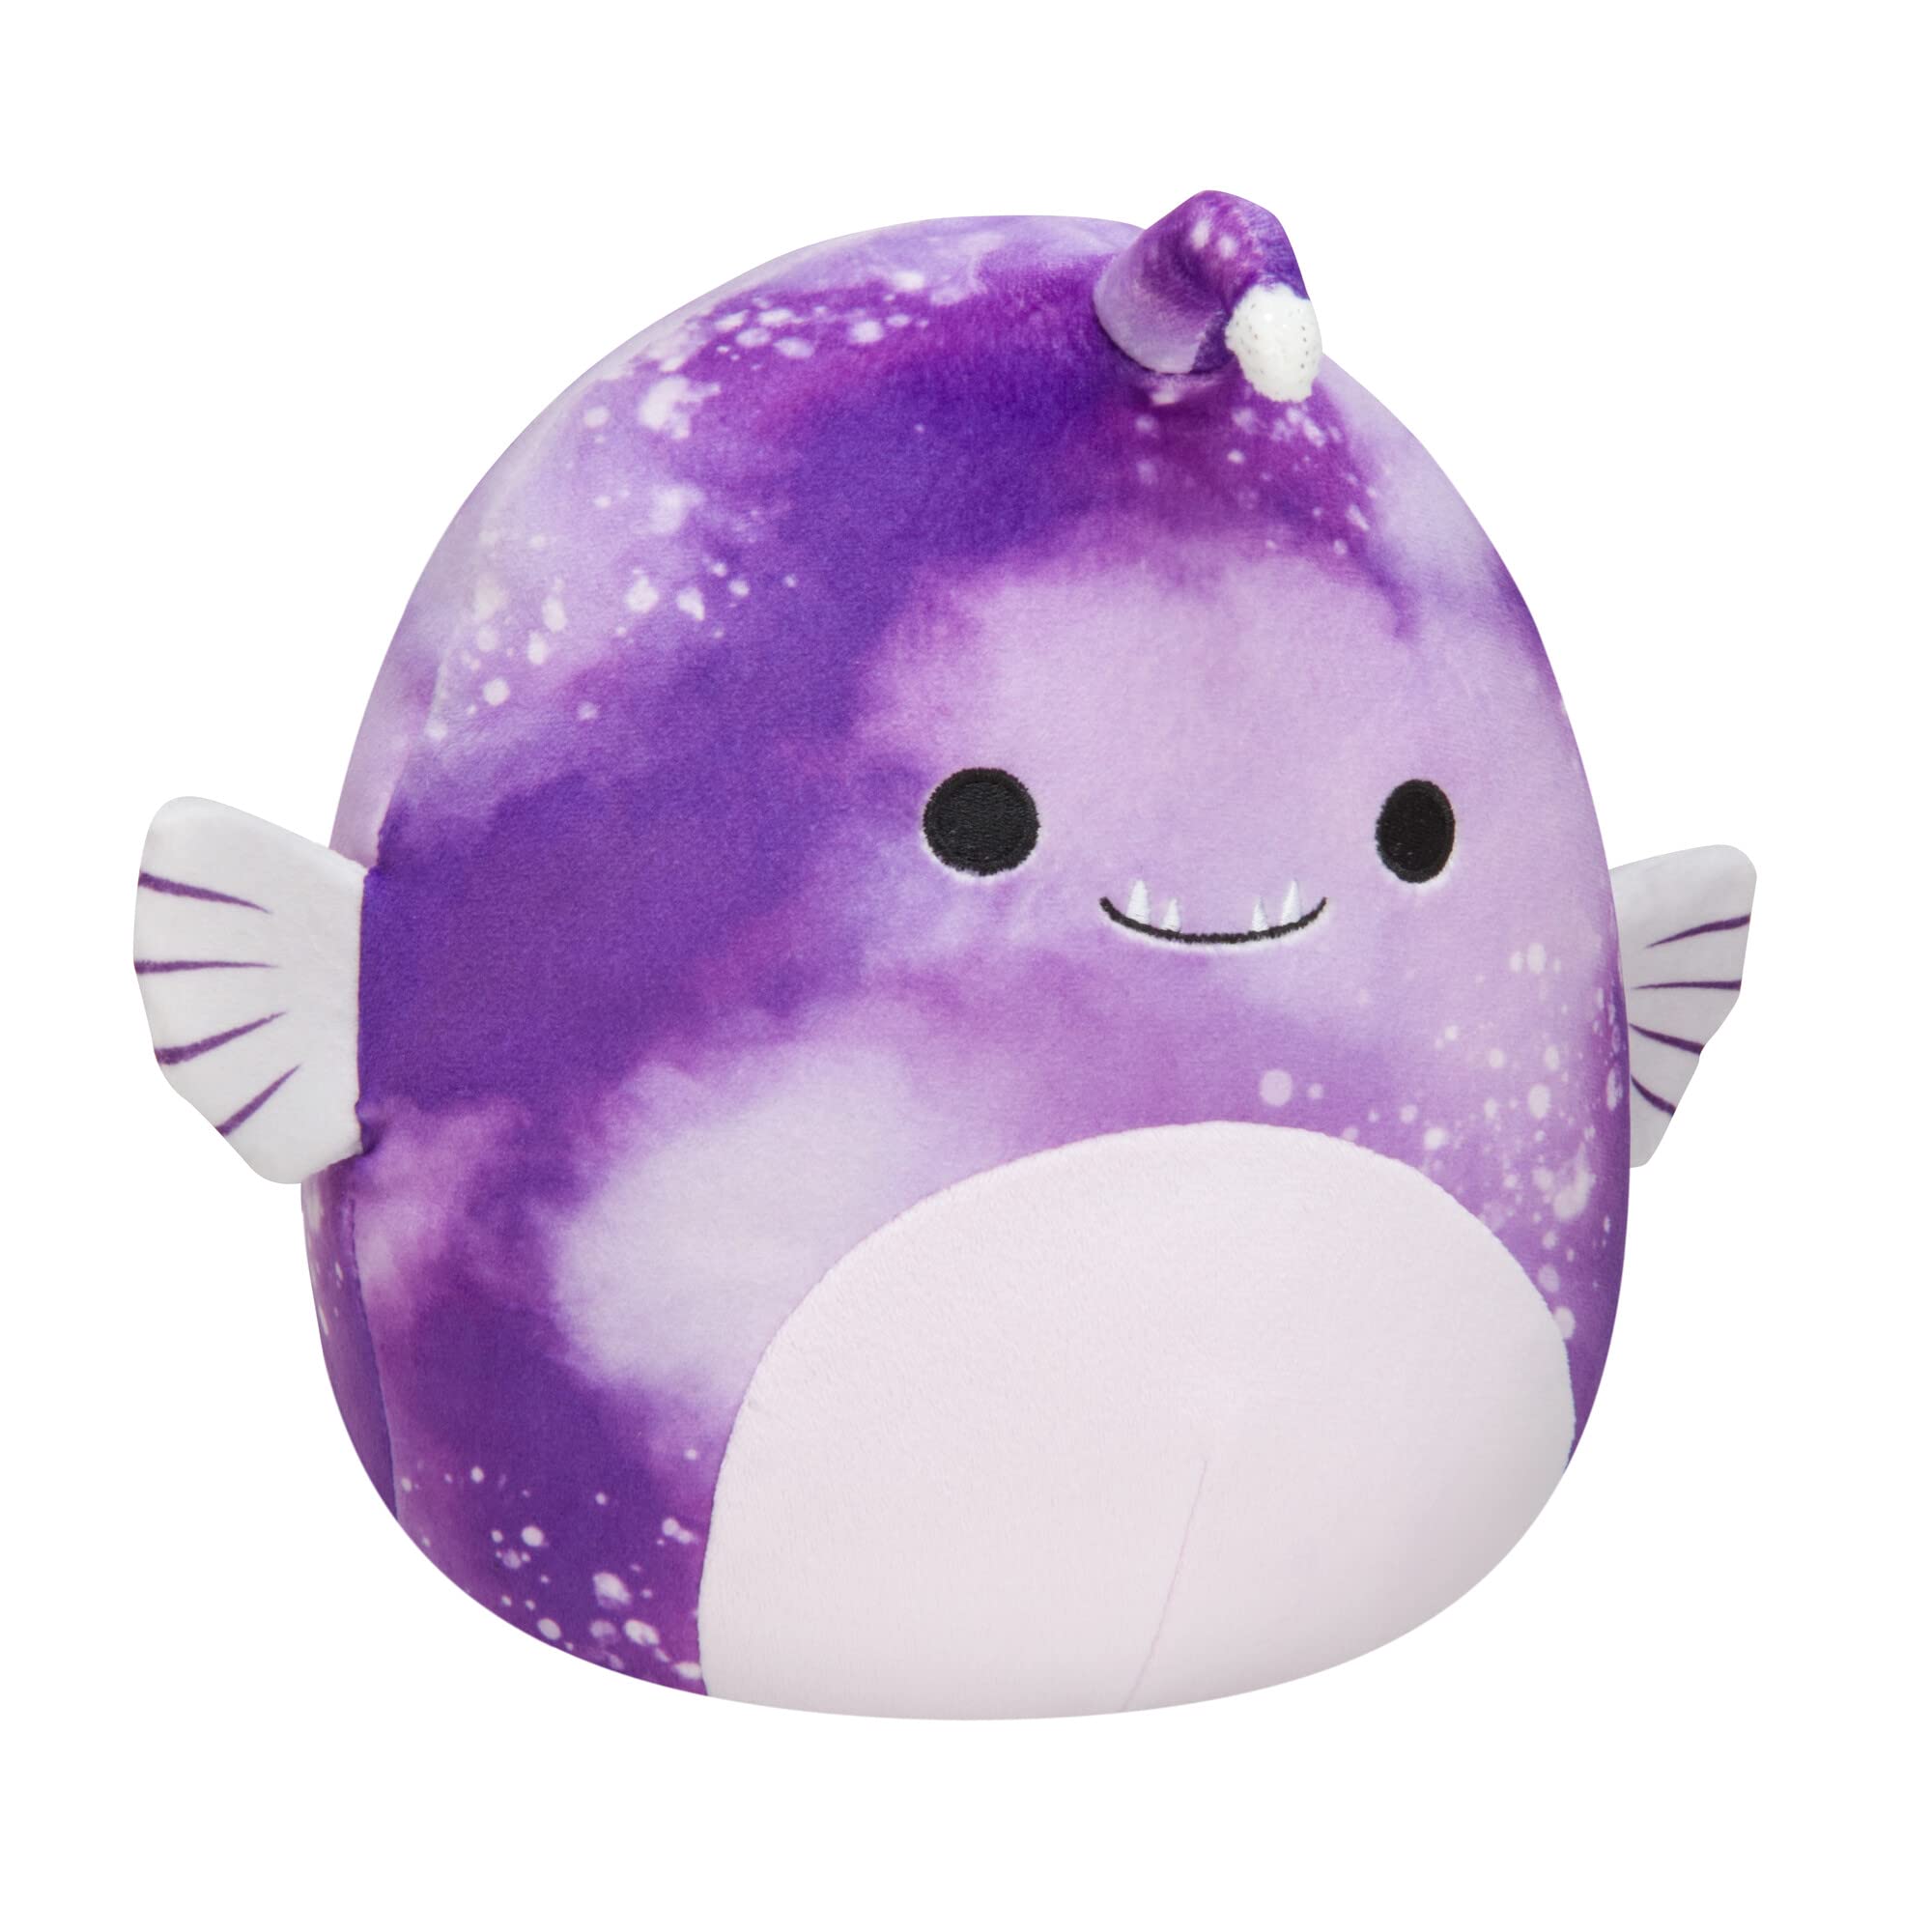 Squishmallows 8" Easton The Anglerfish - Officially Licensed Kellytoy Plush - Collectible Soft & Squishy Fish Stuffed Animal Toy - Add to Your Squad - Gift for Kids, Girls & Boys - 8 Inch